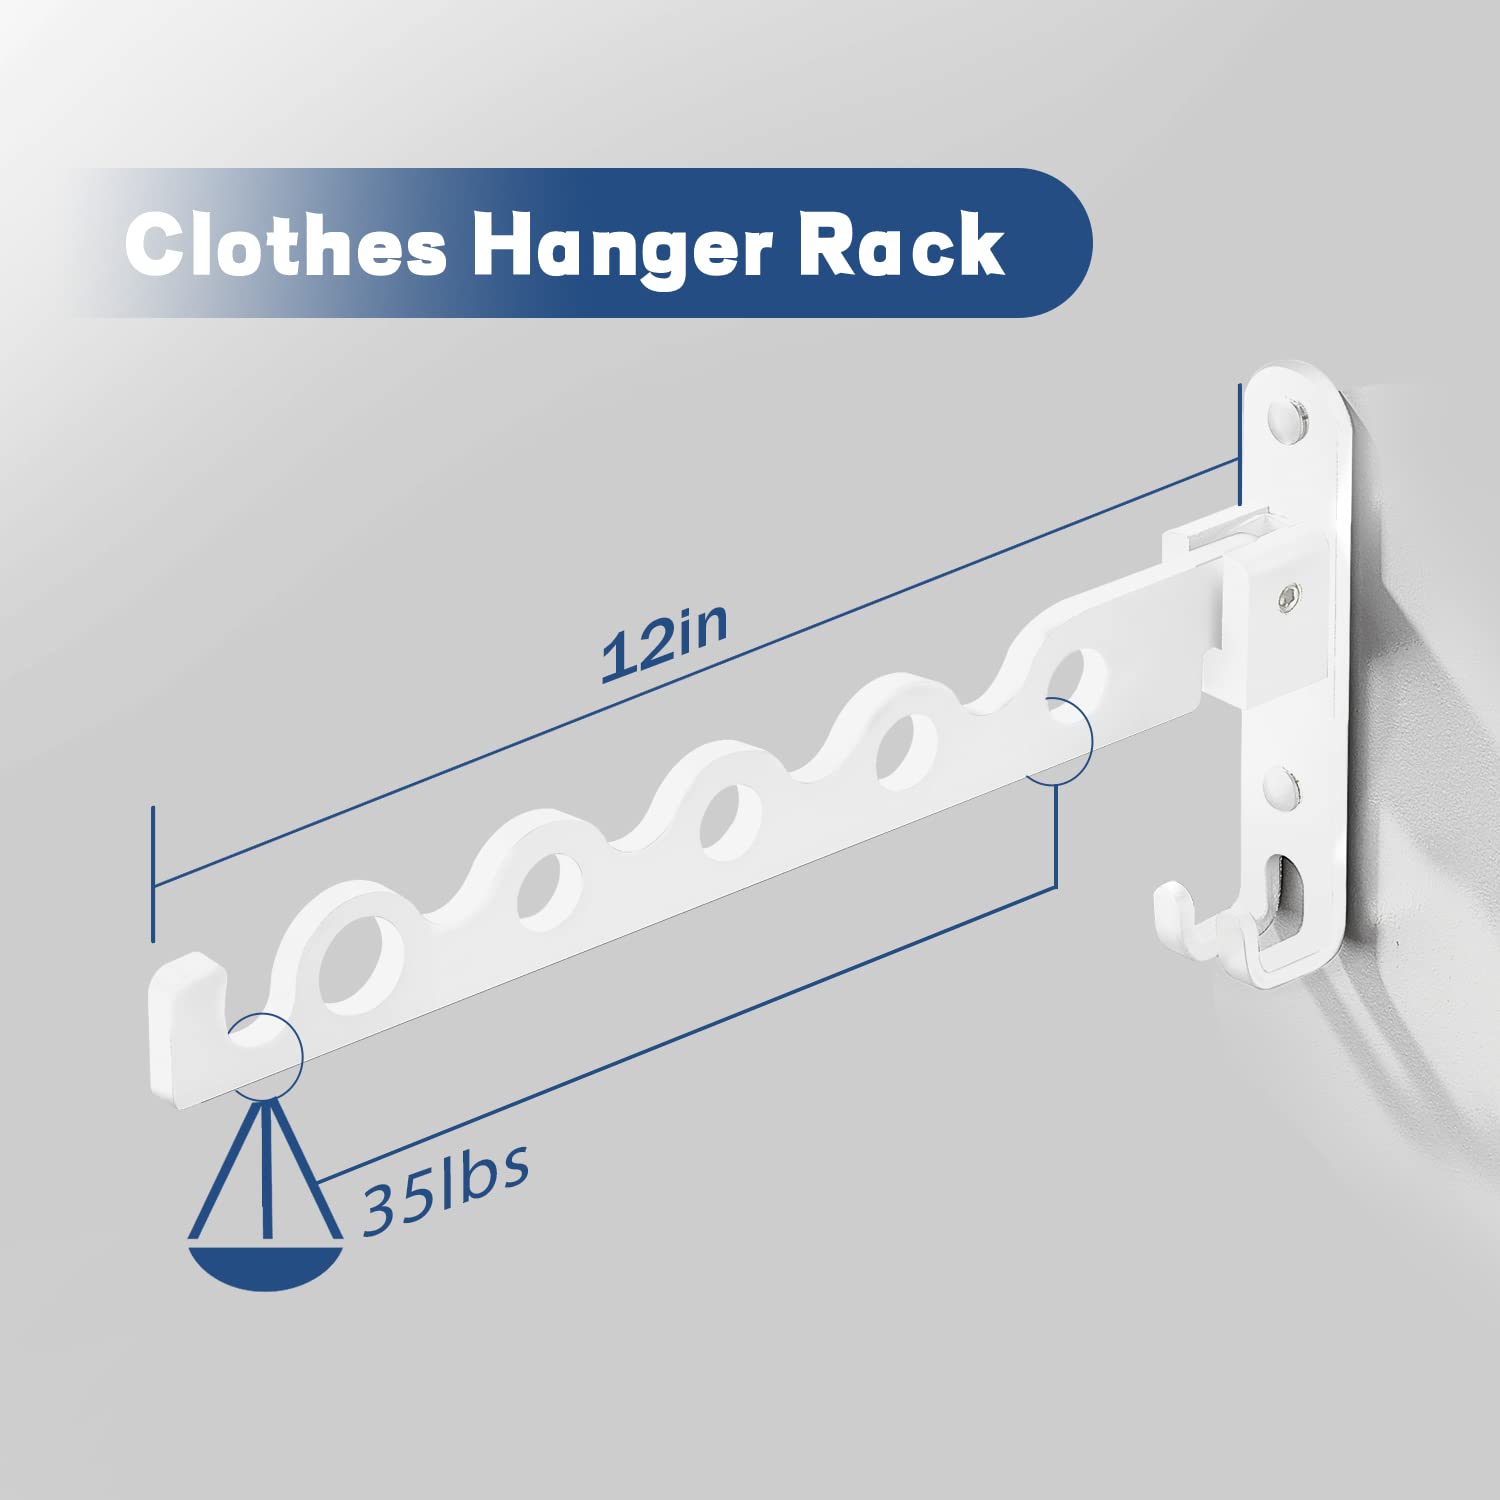 Wall Mounted Hanger Drying Rack,Small Cloth Drying Rack Clothing,Aluminum Laundry Clothes Drying Rack Wall Mount Folding Retractable Laundry Racks for Drying Clothes,Clothing,Wall Clothes Rail, White